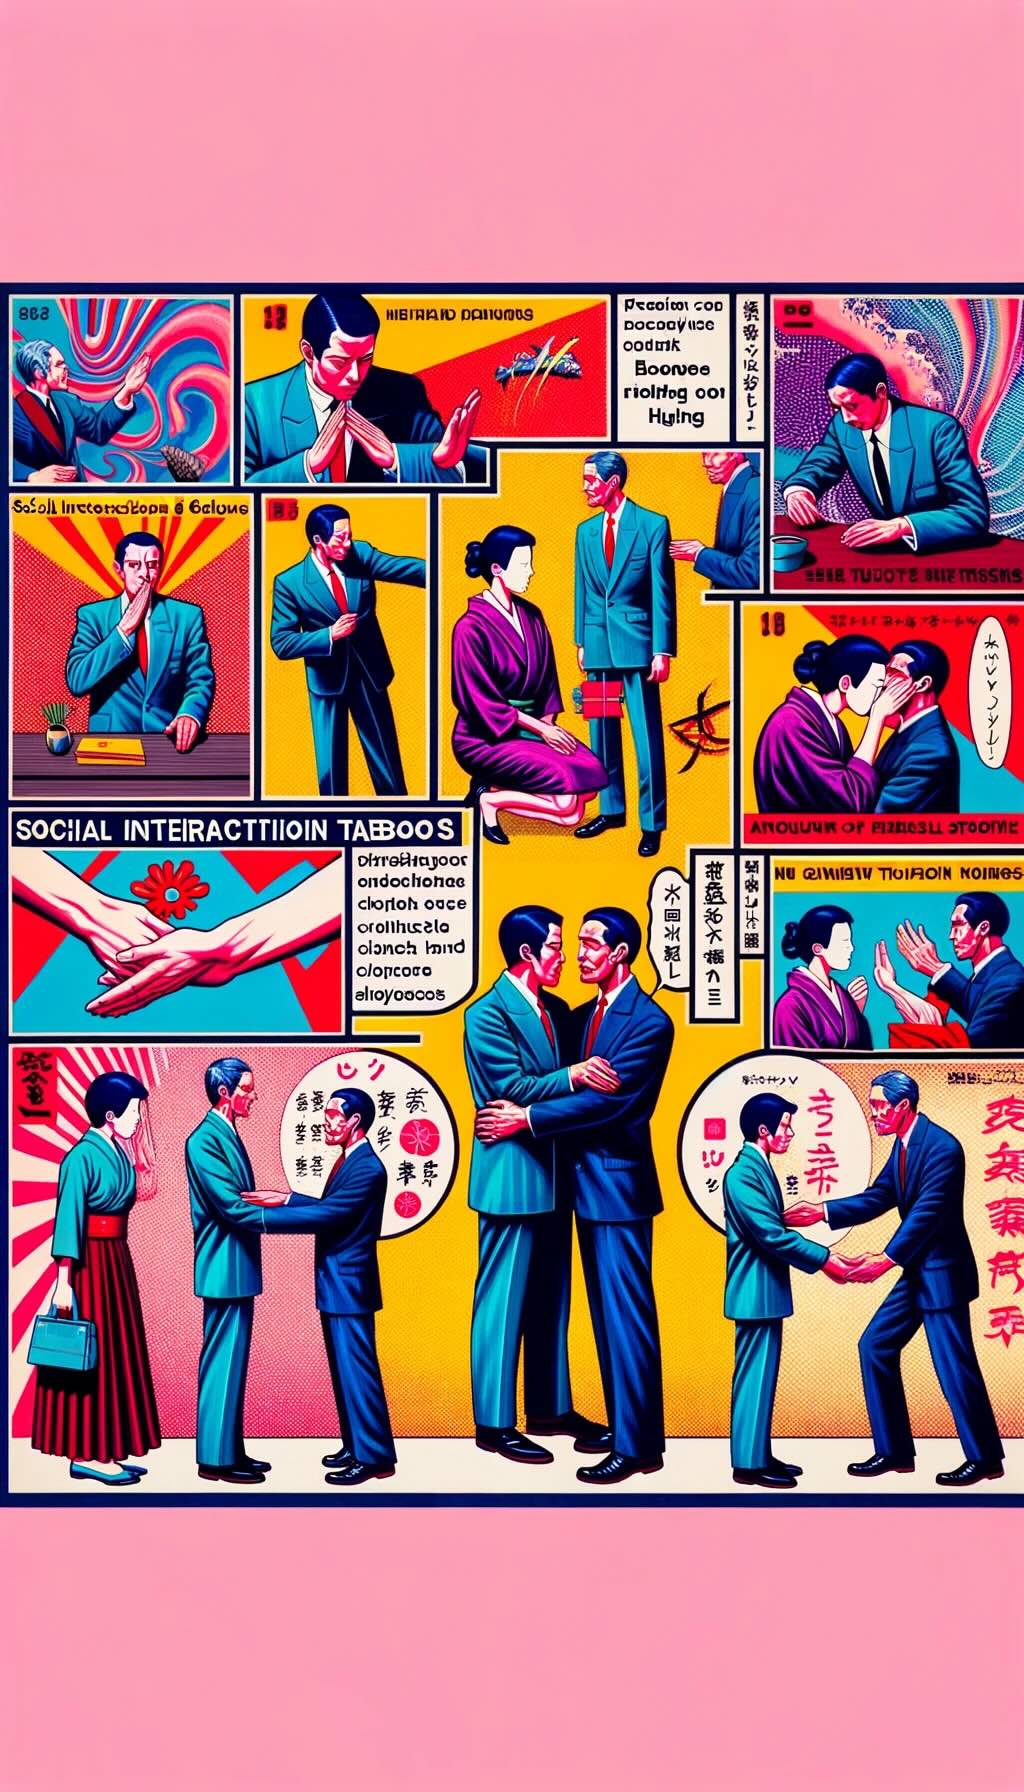 Depiction of social interaction taboos in Japan, capturing the nuances of physical contact, gestures, and verbal communication norms within the cultural context. Represent the subtleties and importance of respecting personal space and maintaining group harmony in social interactions in Japanese culture. The modern and abstract interpretation emphasizes the cultural significance of these social taboos.